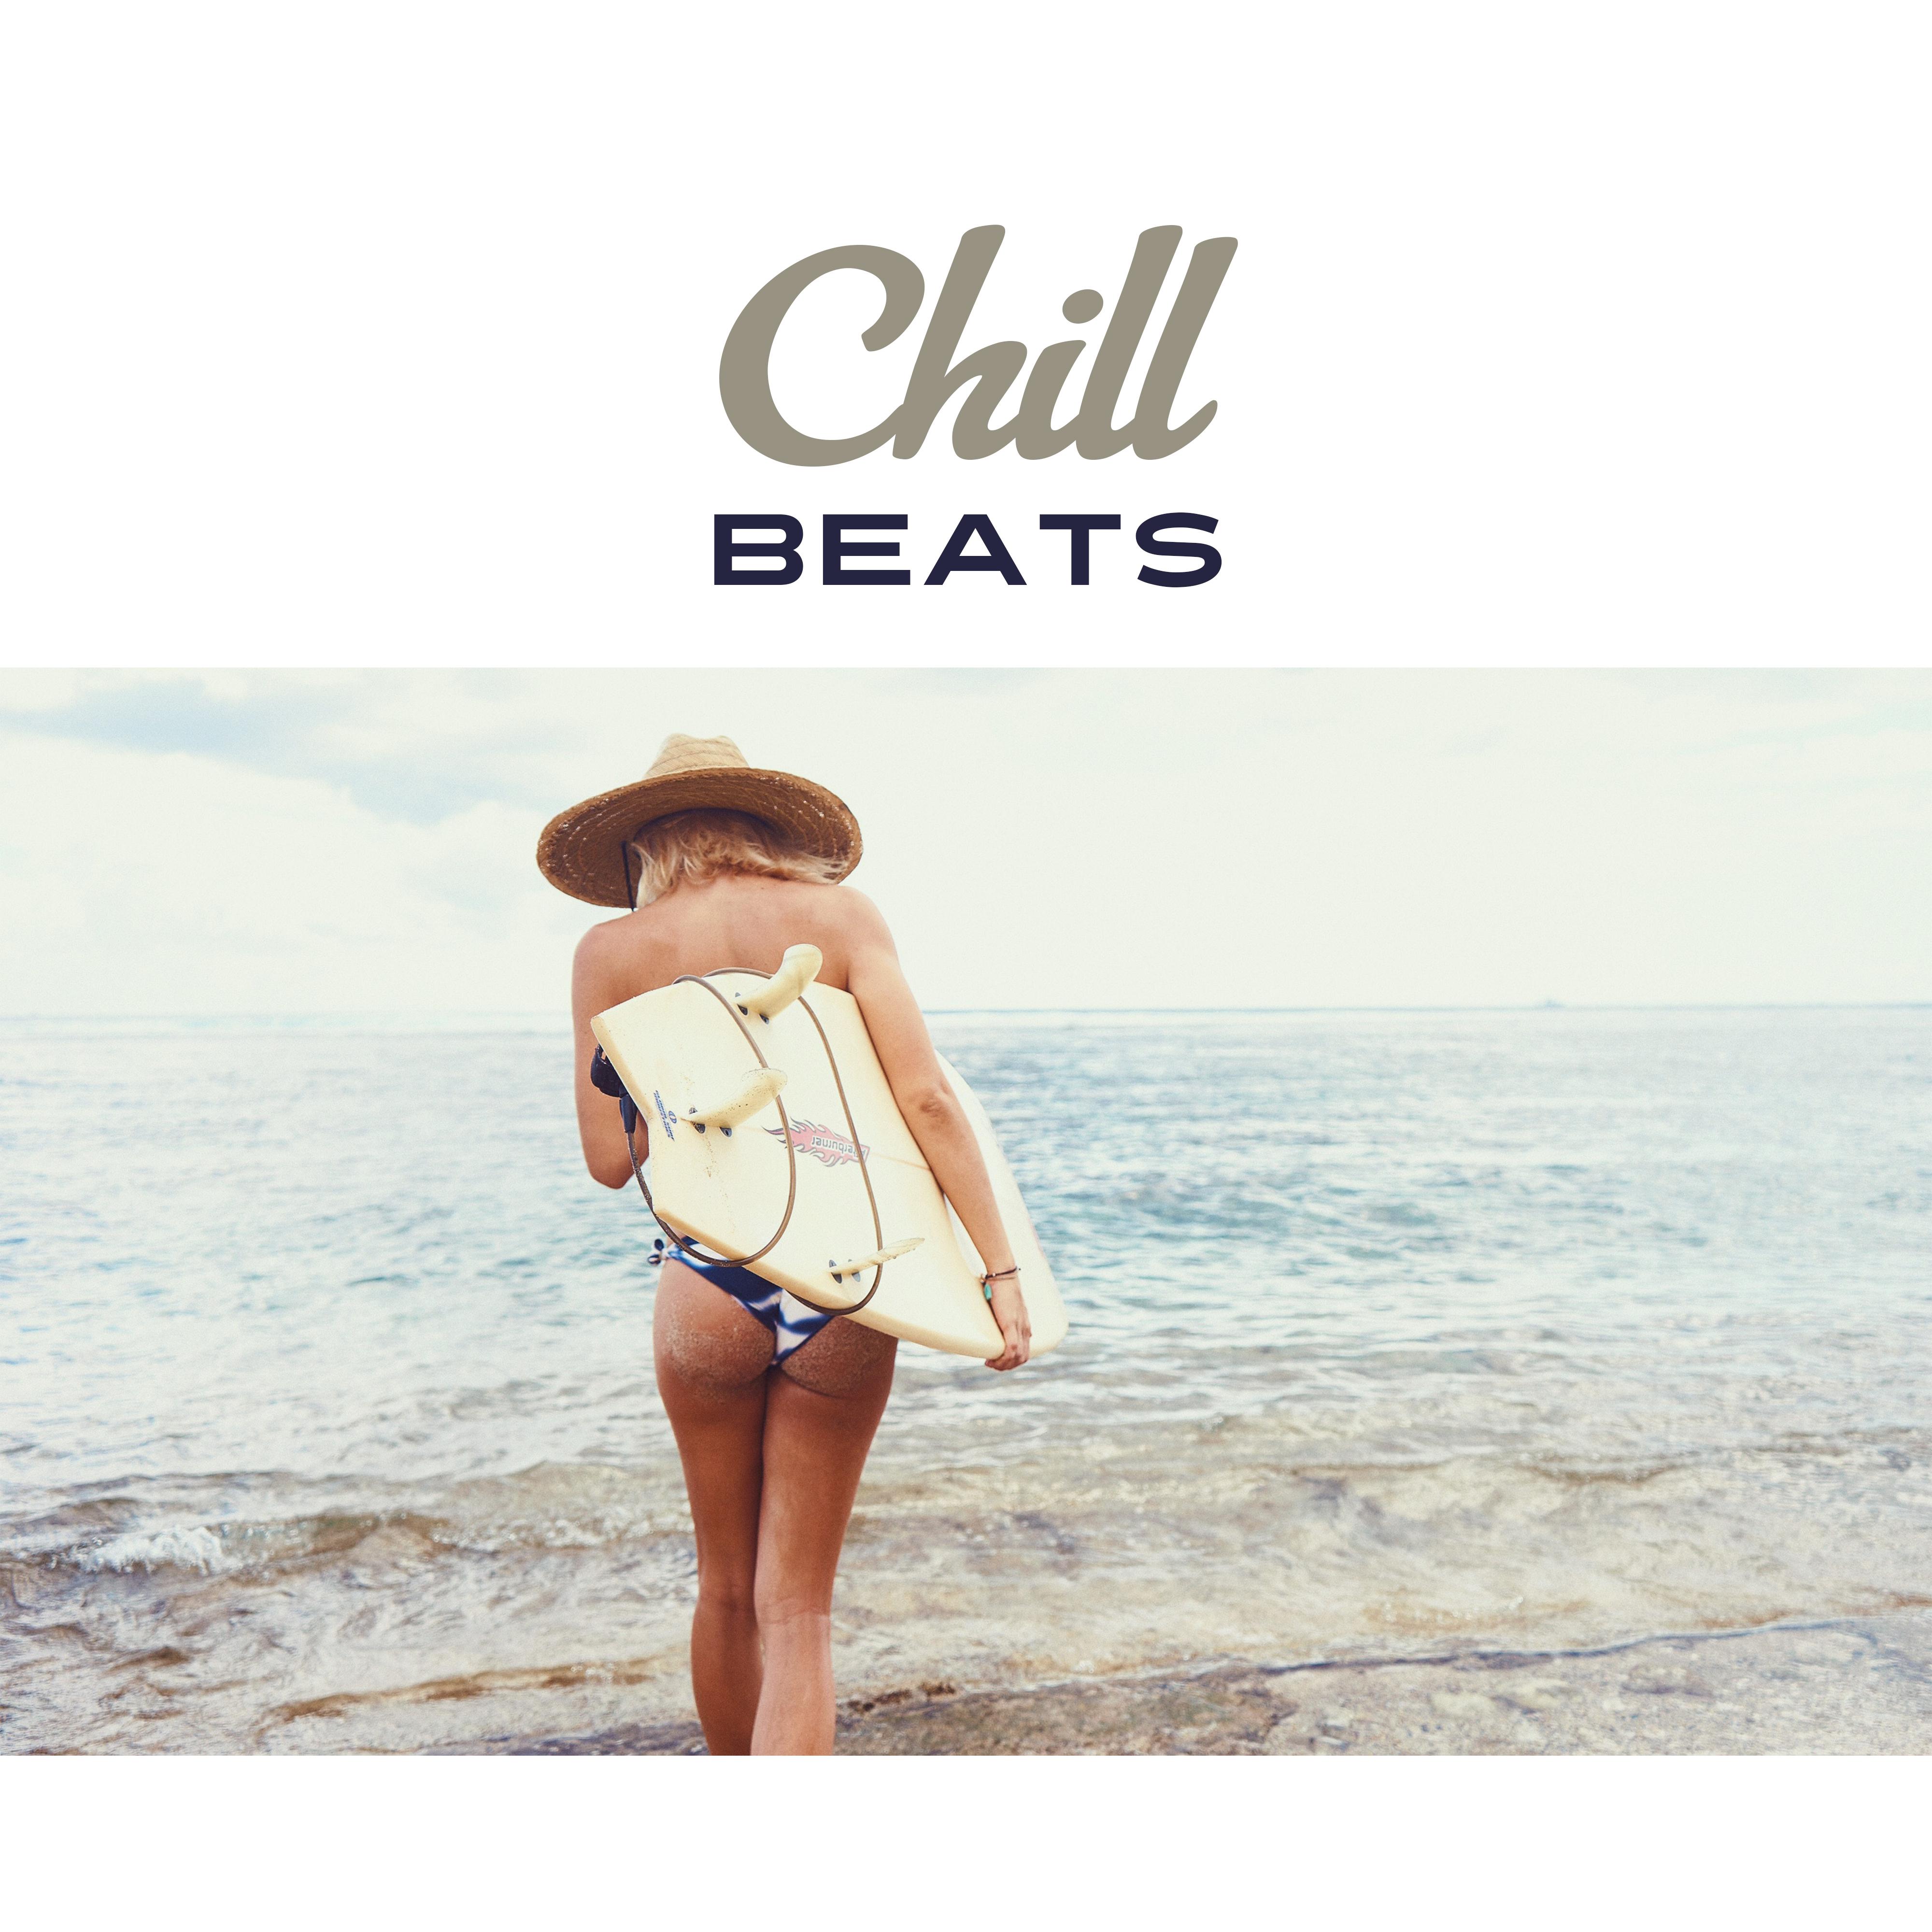 Chill Beats – Ibiza Dance Party, Beach Chill, Pure Relaxation, Calm Down, Ibiza Lounge, Rest, Holiday Chill Out Music 2017